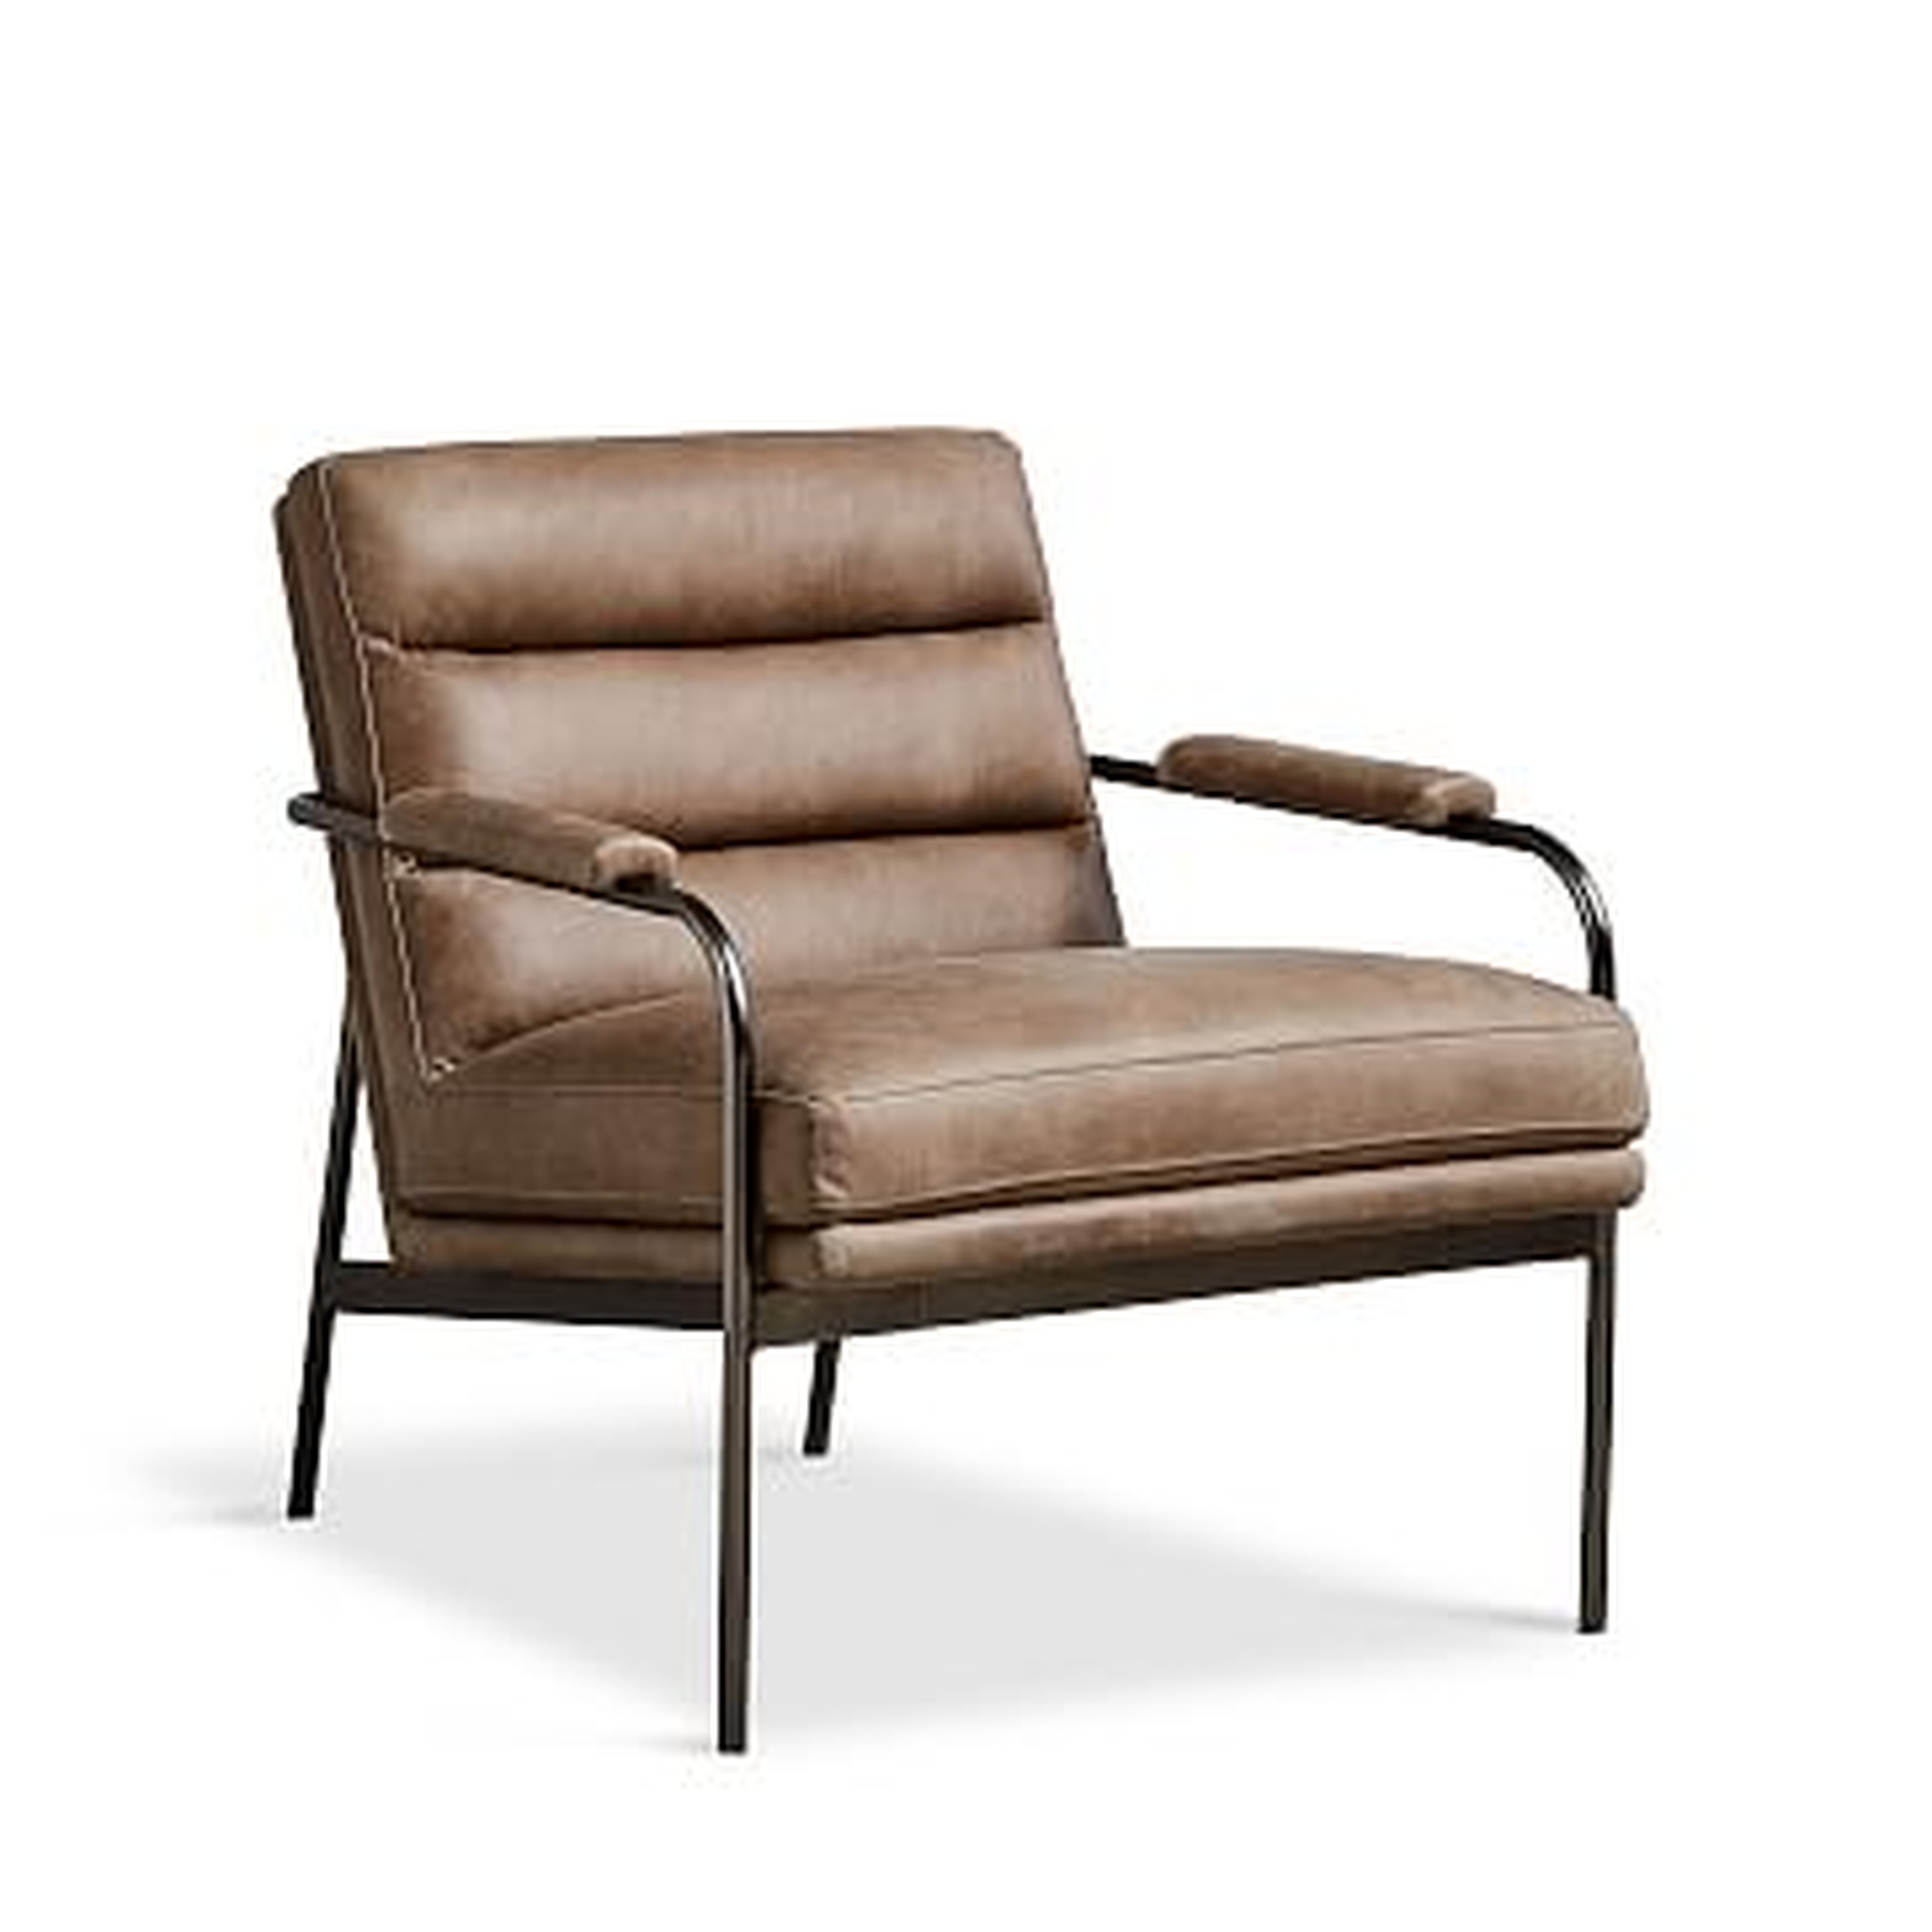 Camden Leather Chair - West Elm